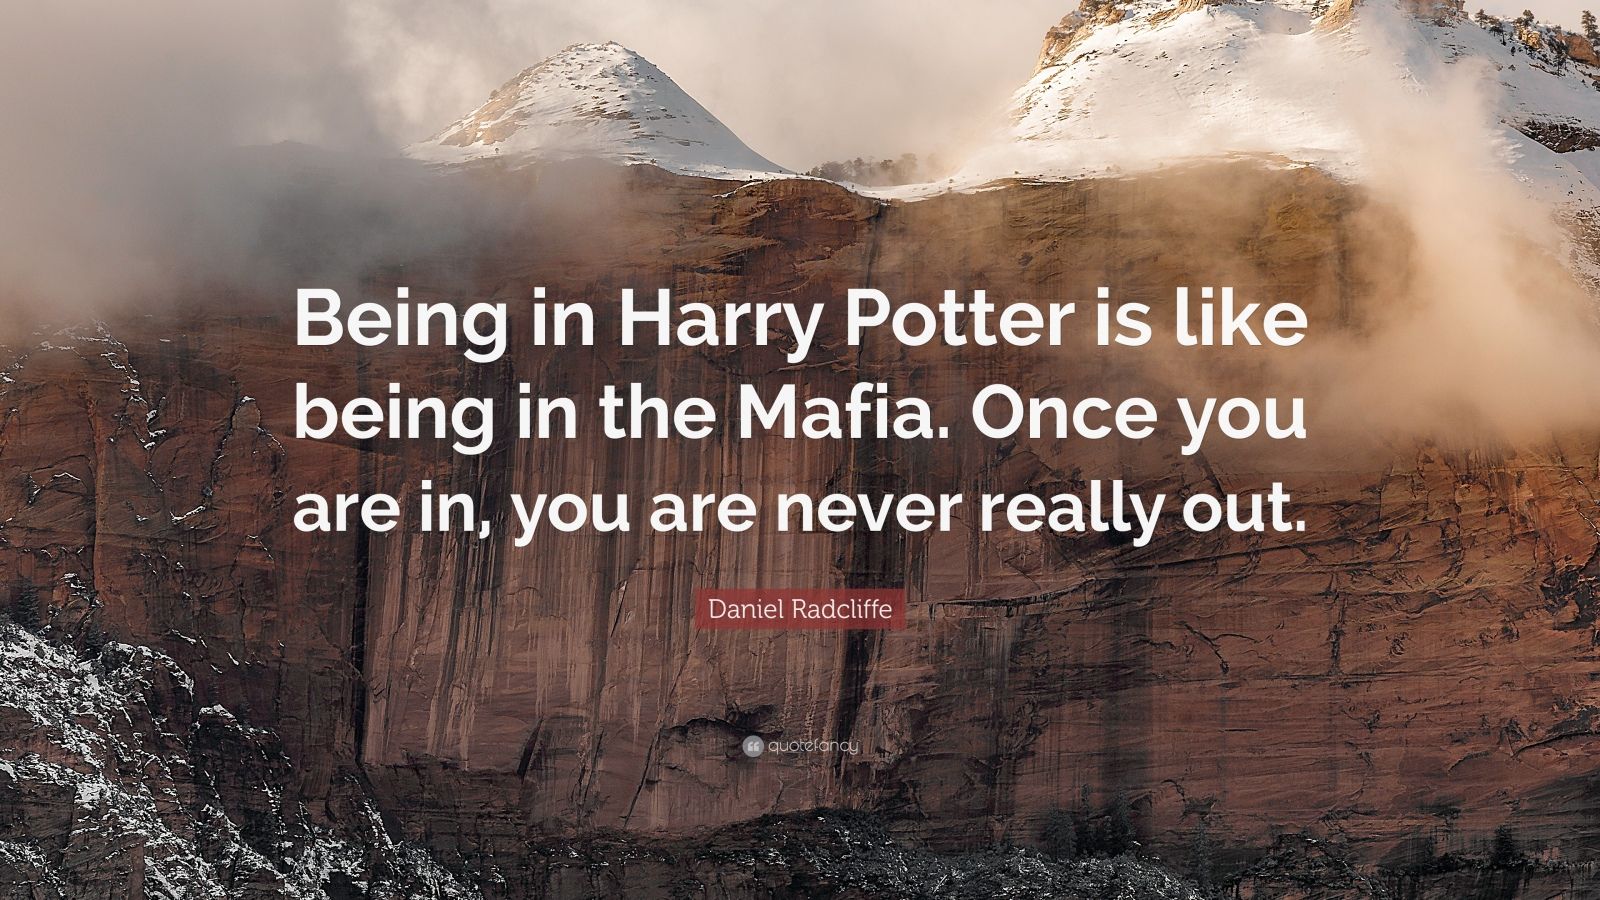 Daniel Radcliffe Quote “Being in Harry Potter is like being in the Mafia